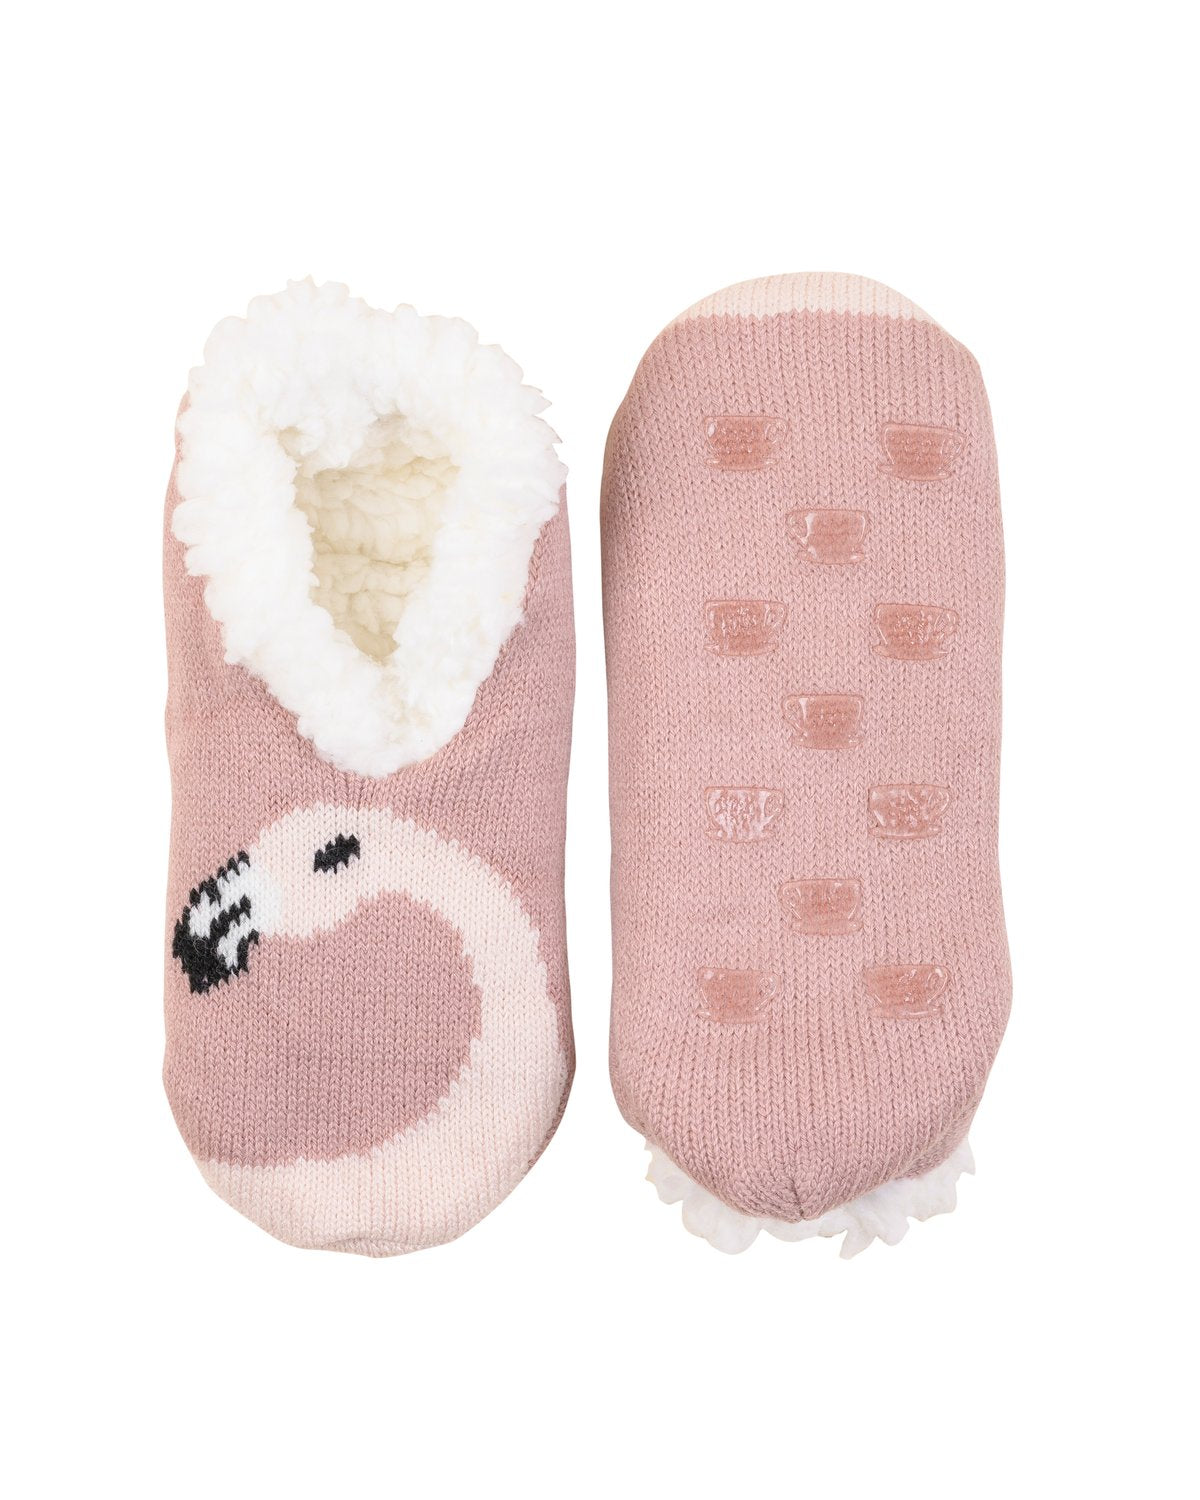 Coffee Shoppe Critter Ankle Slippers - Flamingo